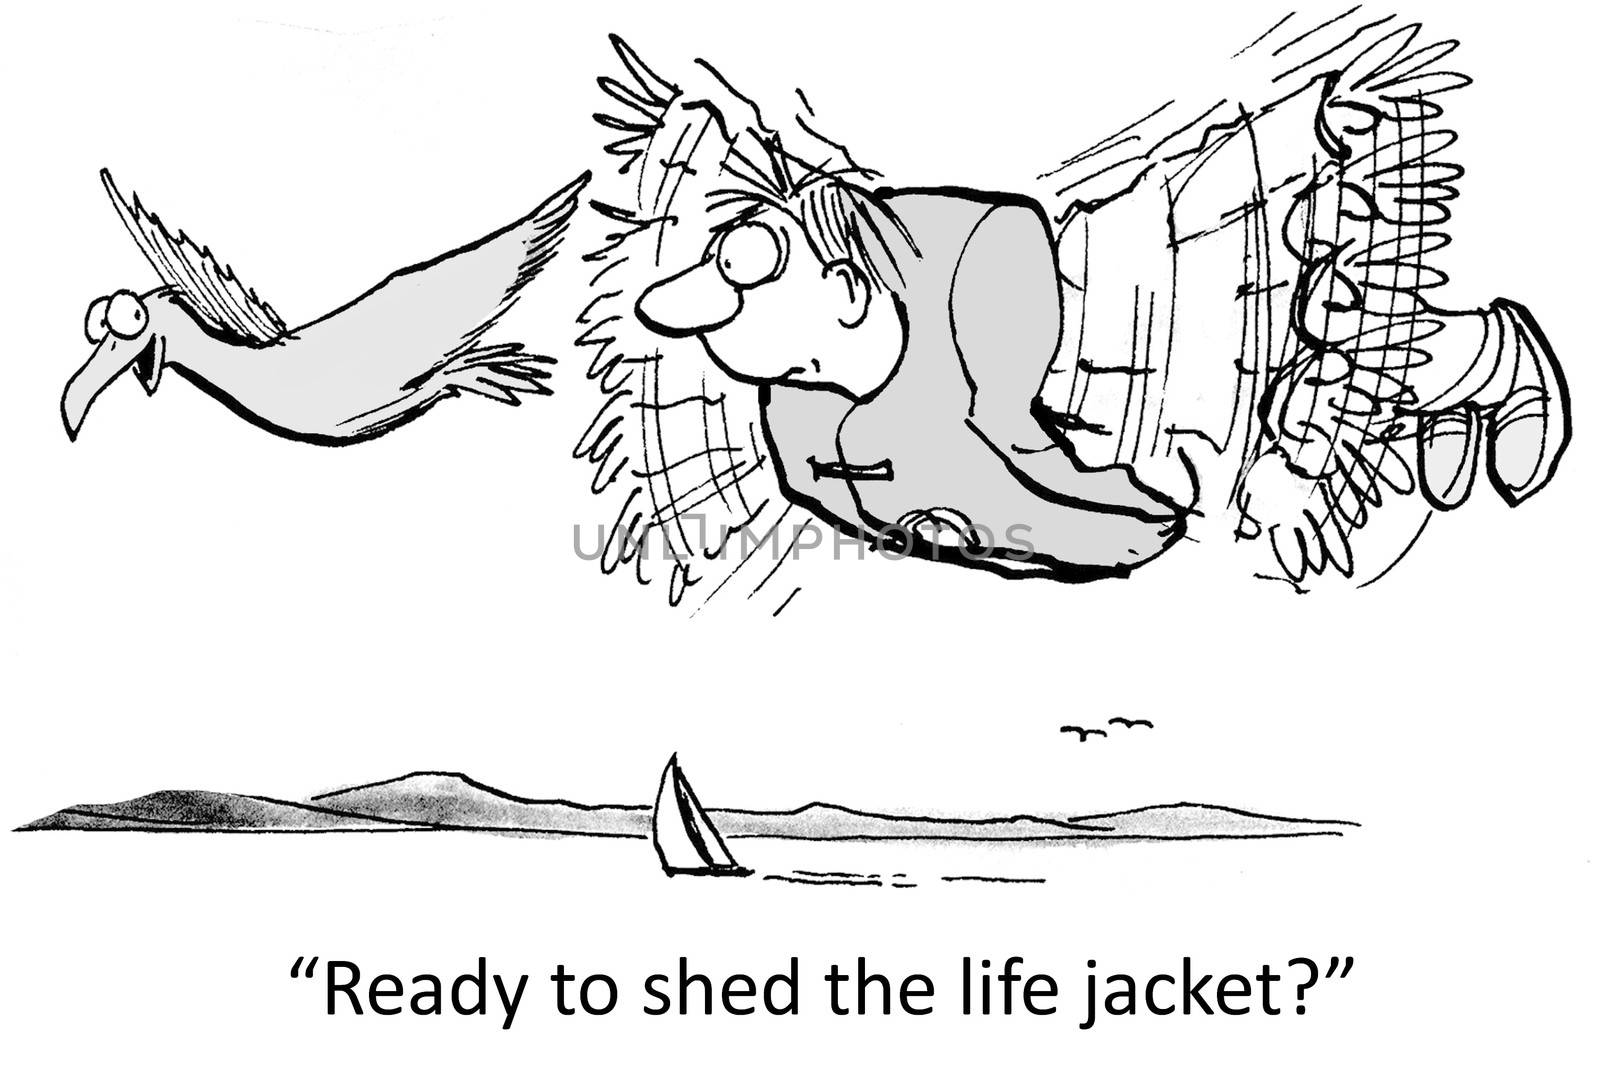 "Ready to shed the life jacket?"